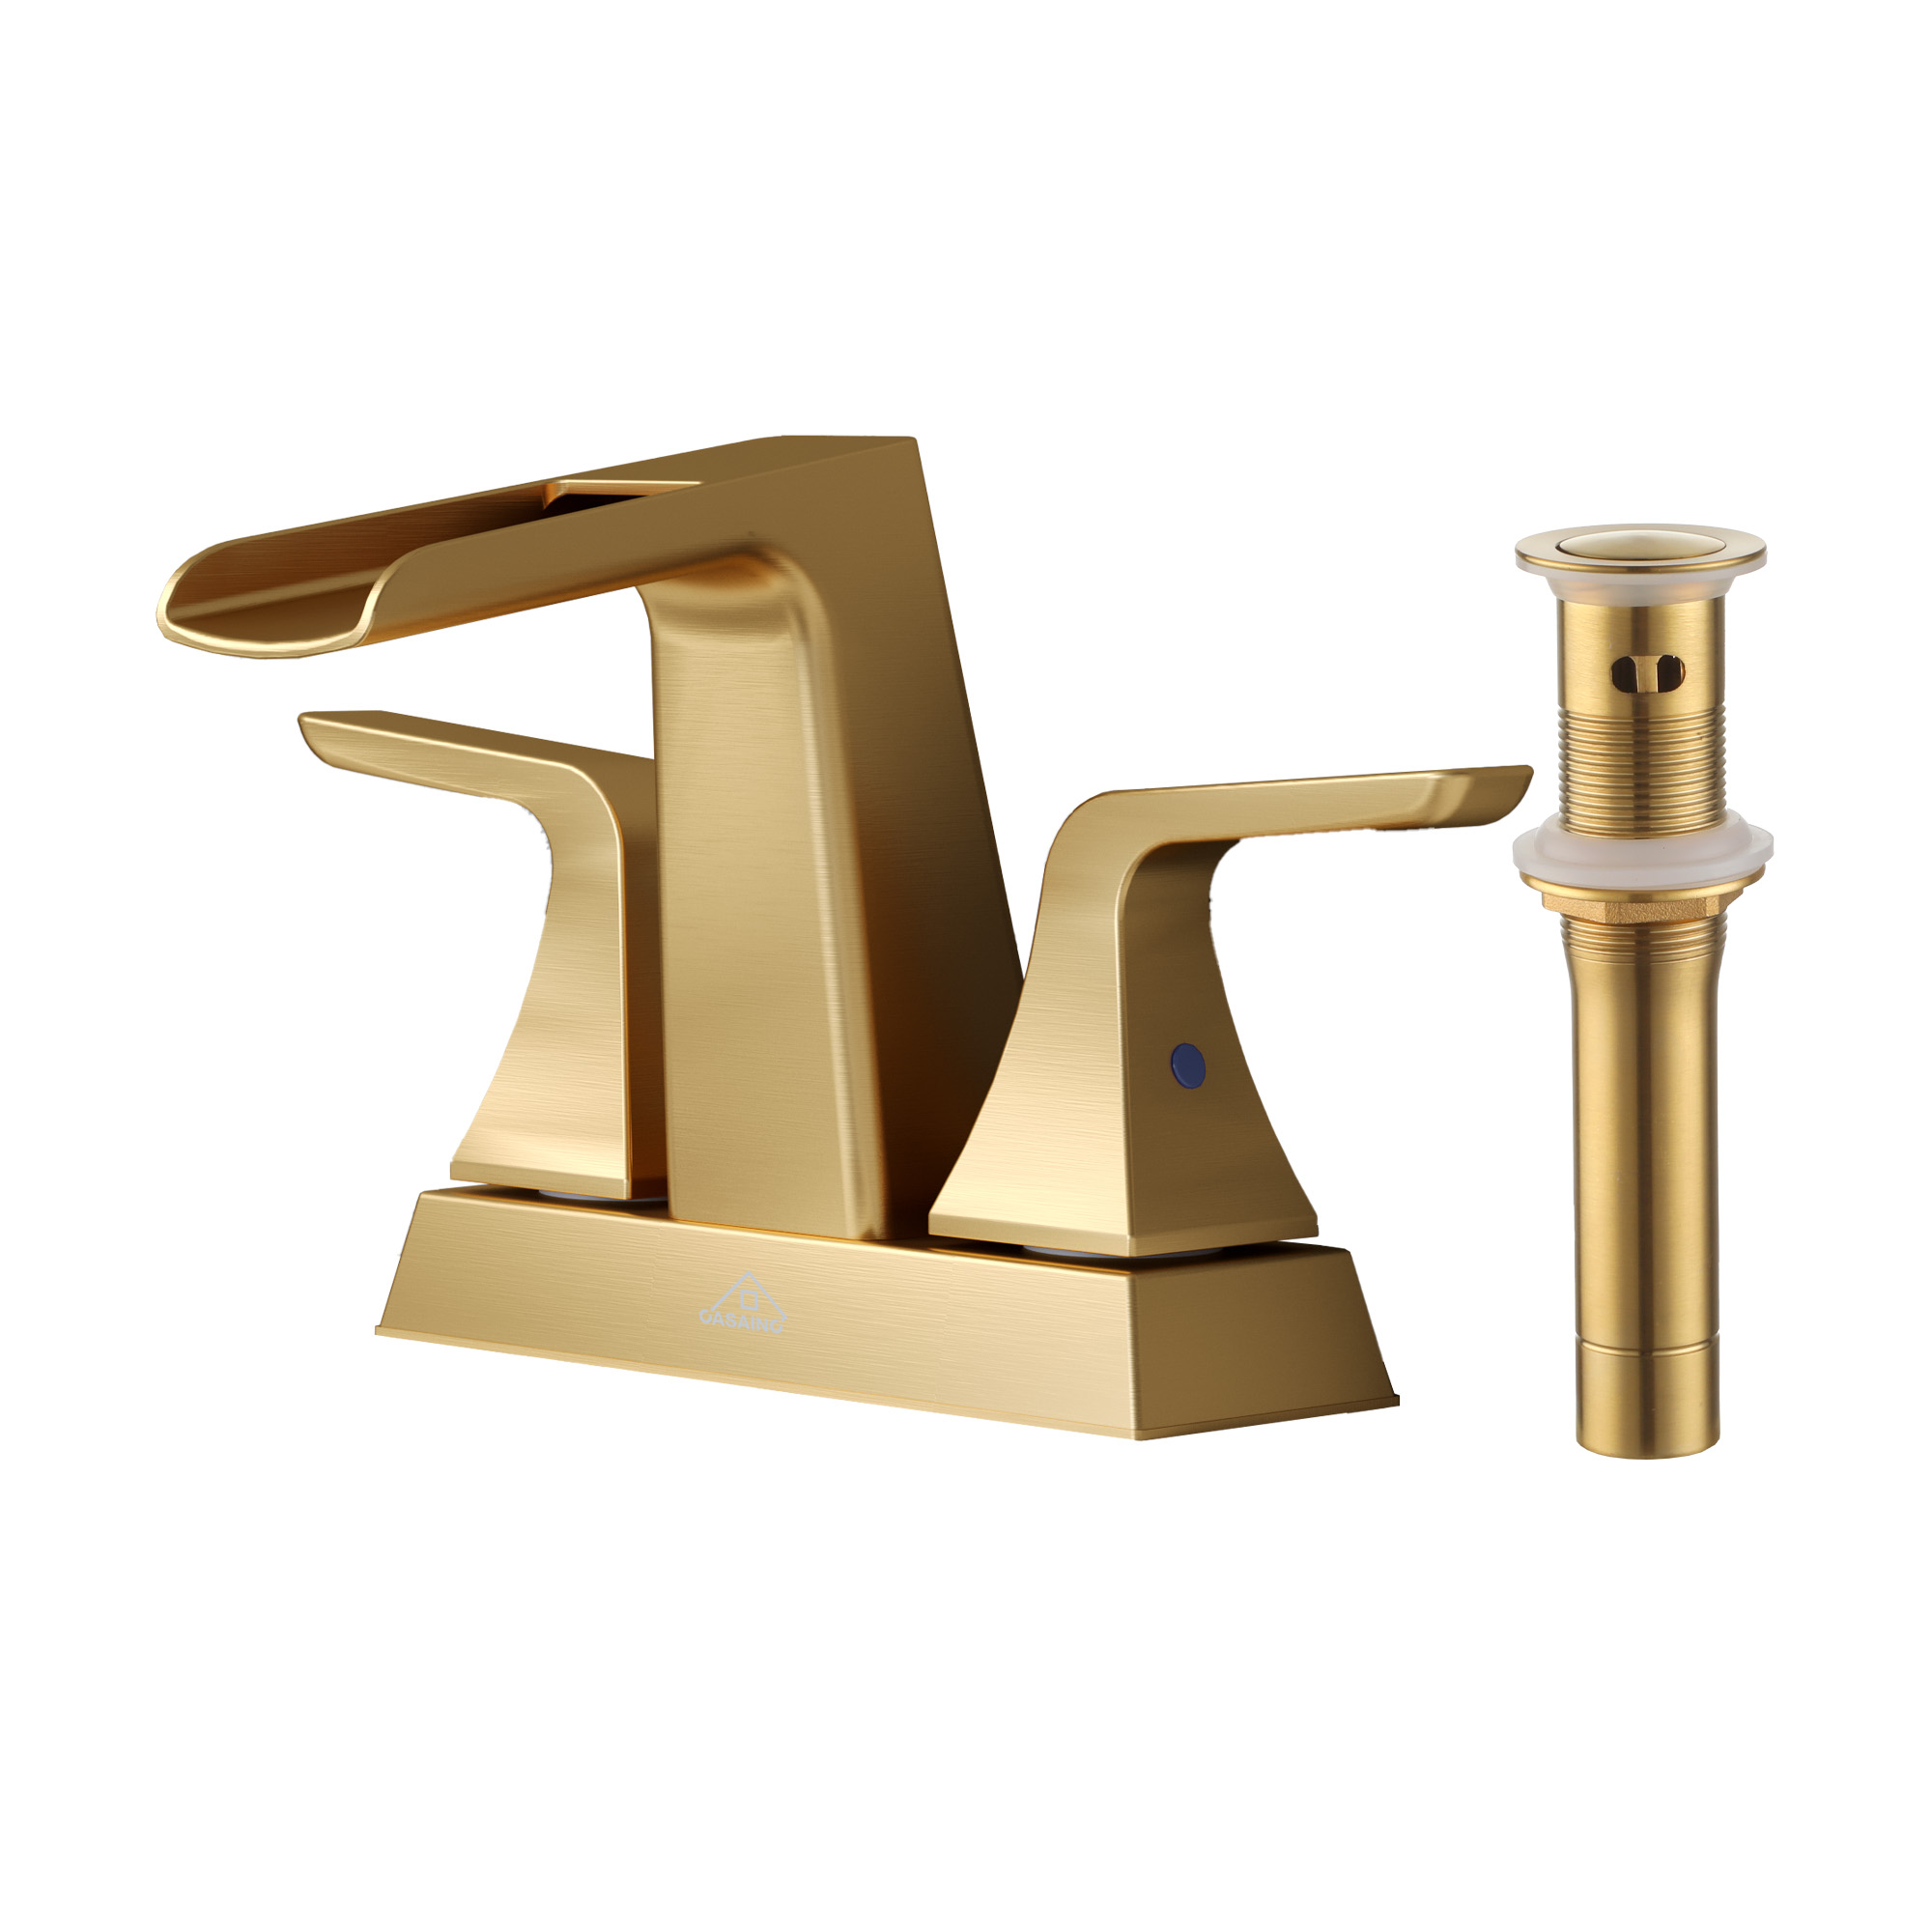 2 Handle Waterfall Brass Bathroom Sink Faucet 4 Inch Center Set 2-3 Hole RV Modern Bath Vanity Faucet Deck Mount with Metal Pop Up Drain and Supply Line